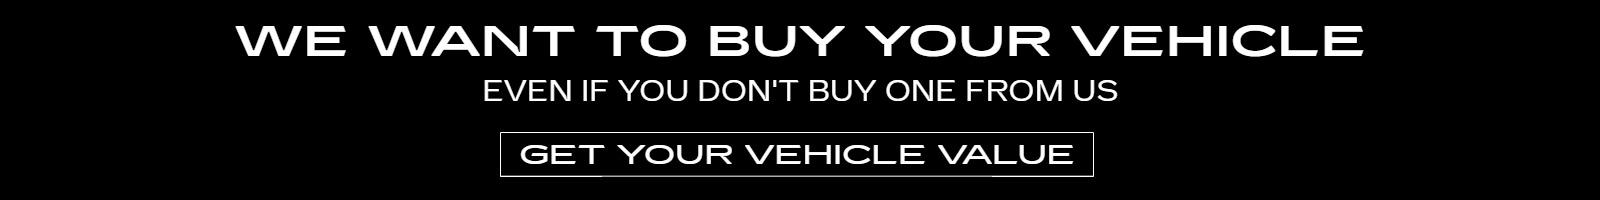 We want to buy your vehicle, even if you don't buy one from us | Get your vehicle value>